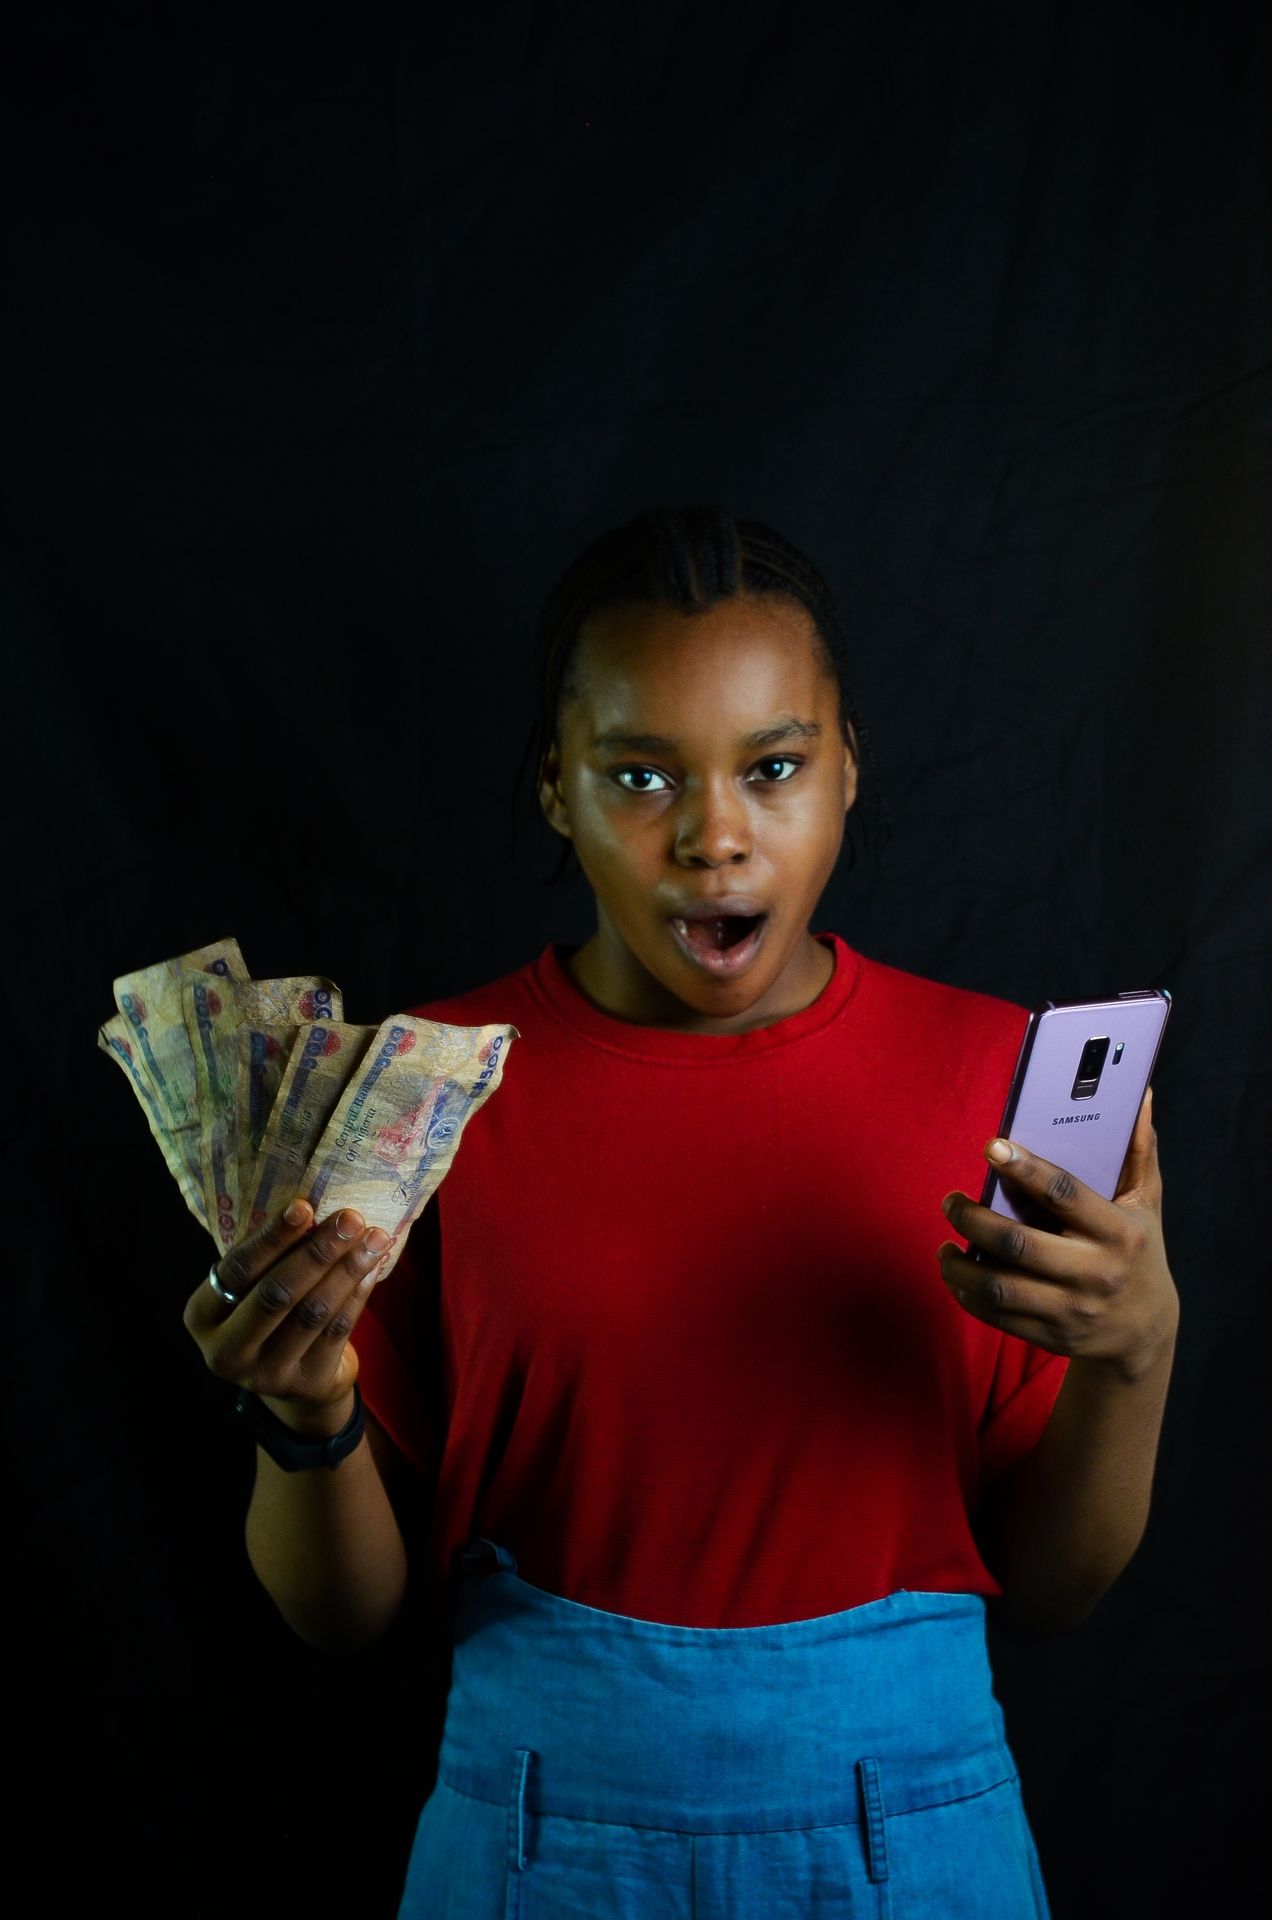 Top 5 Ways to Make Money with Your Phone in Nigeria